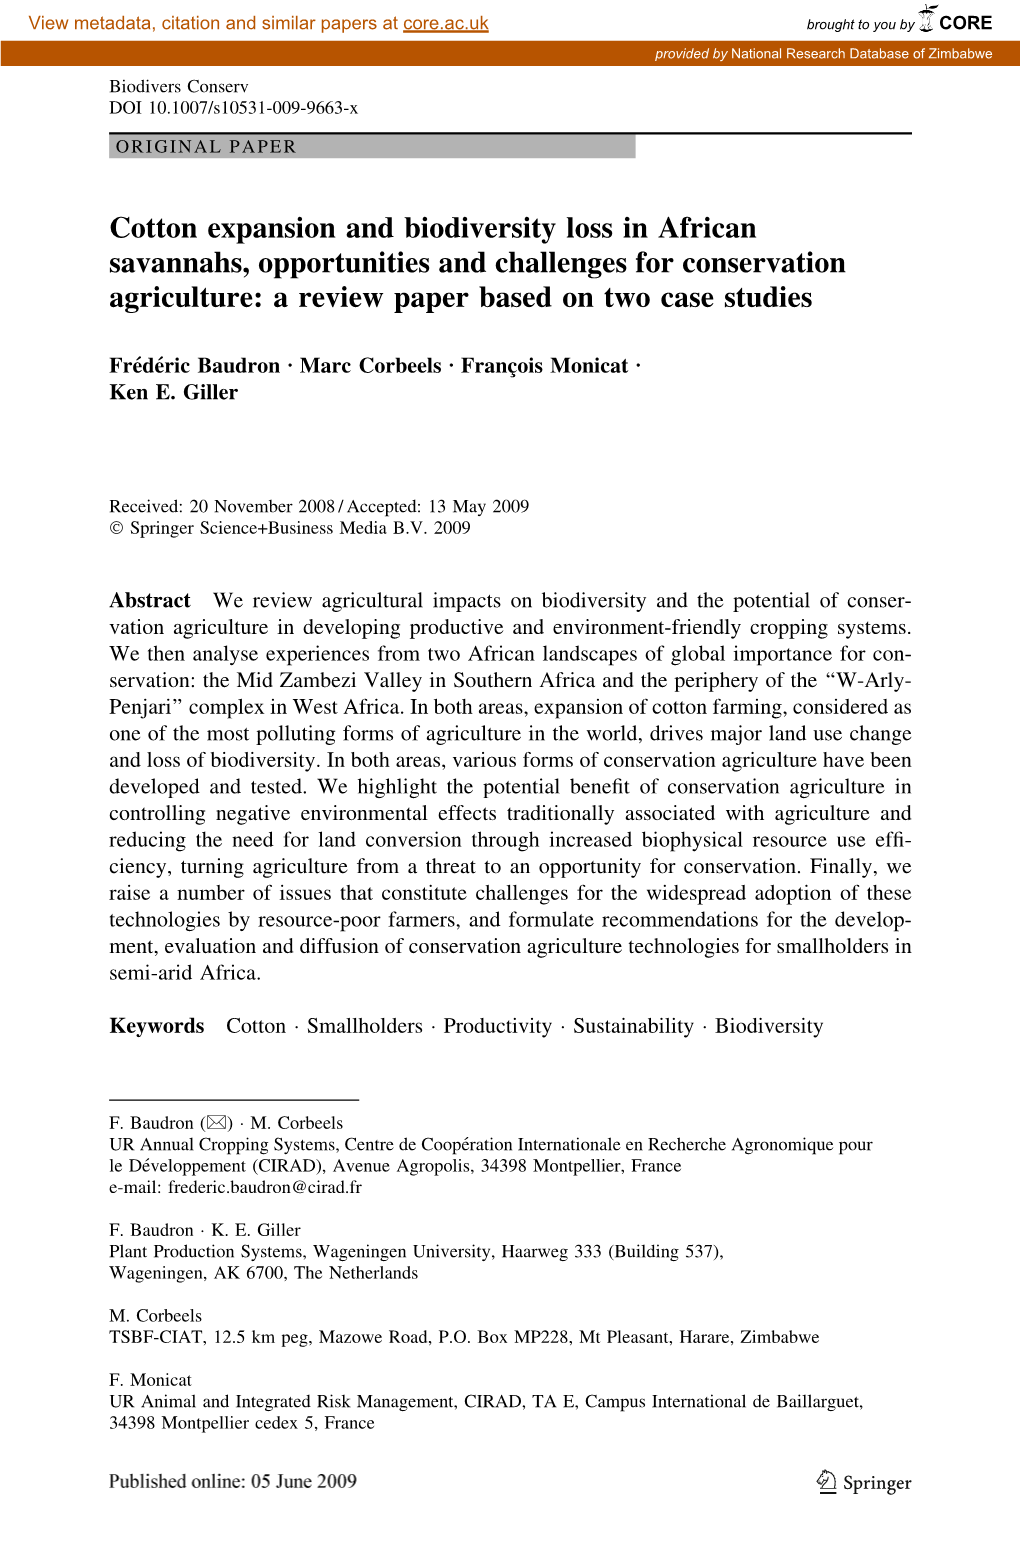 Cotton Expansion and Biodiversity Loss in African Savannahs, Opportunities and Challenges for Conservation Agriculture: a Review Paper Based on Two Case Studies